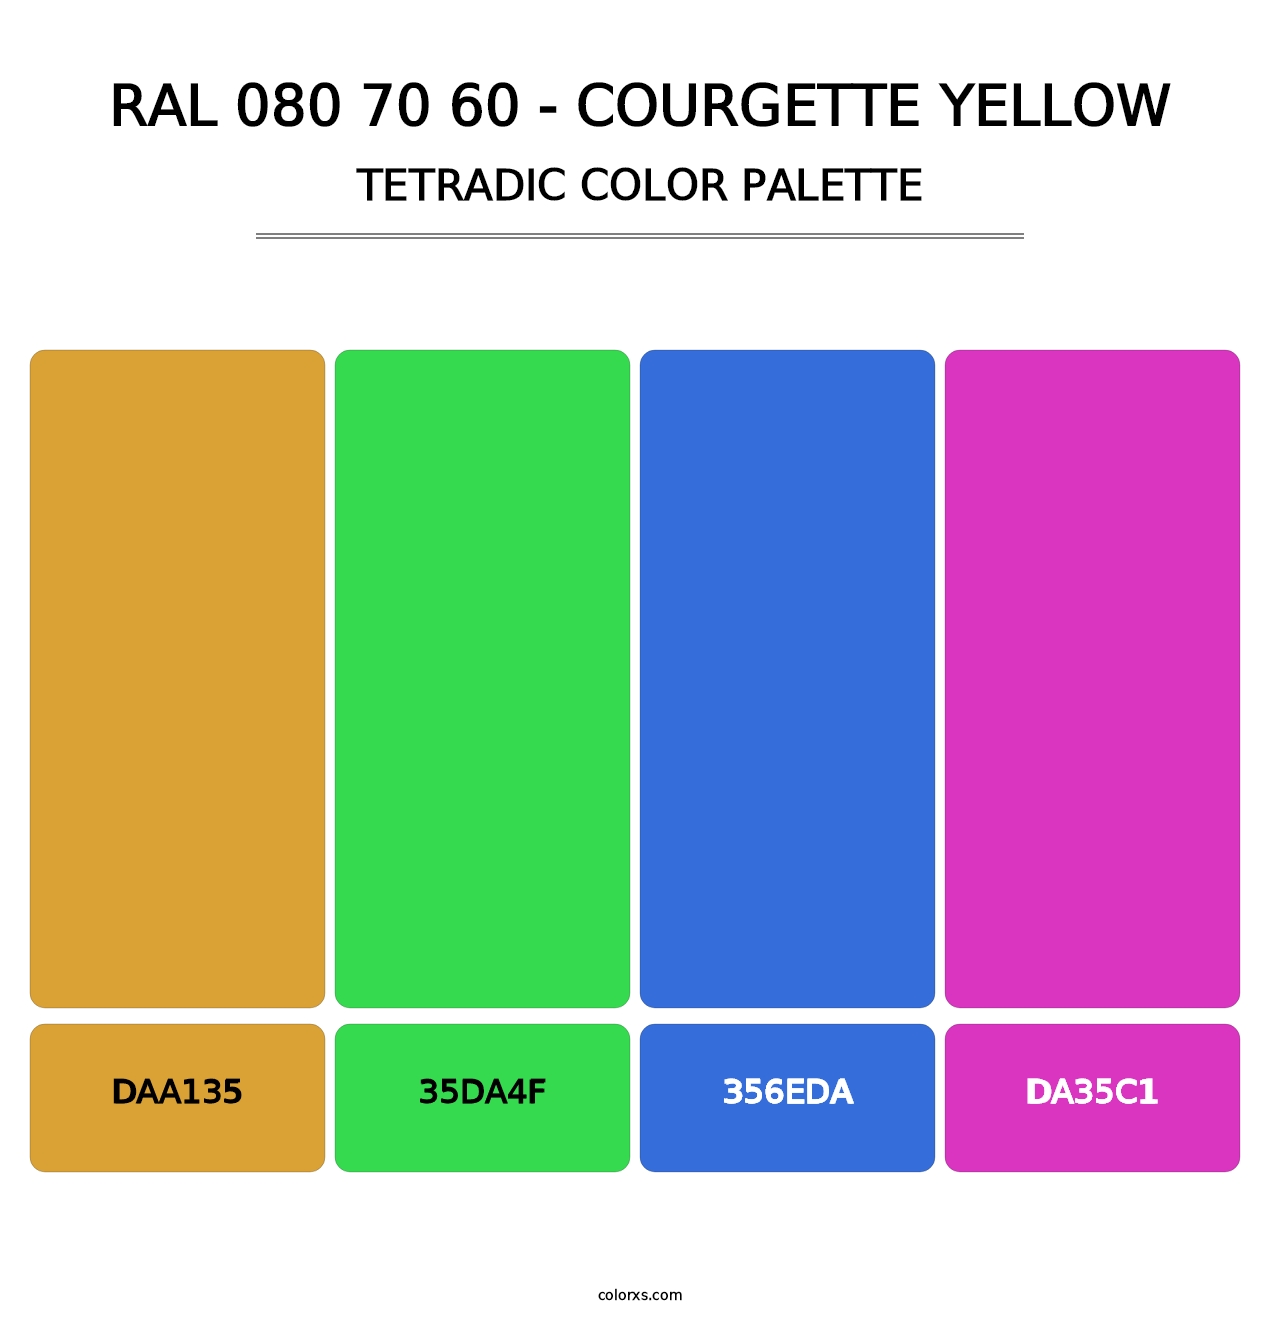 RAL 080 70 60 - Courgette Yellow - Tetradic Color Palette